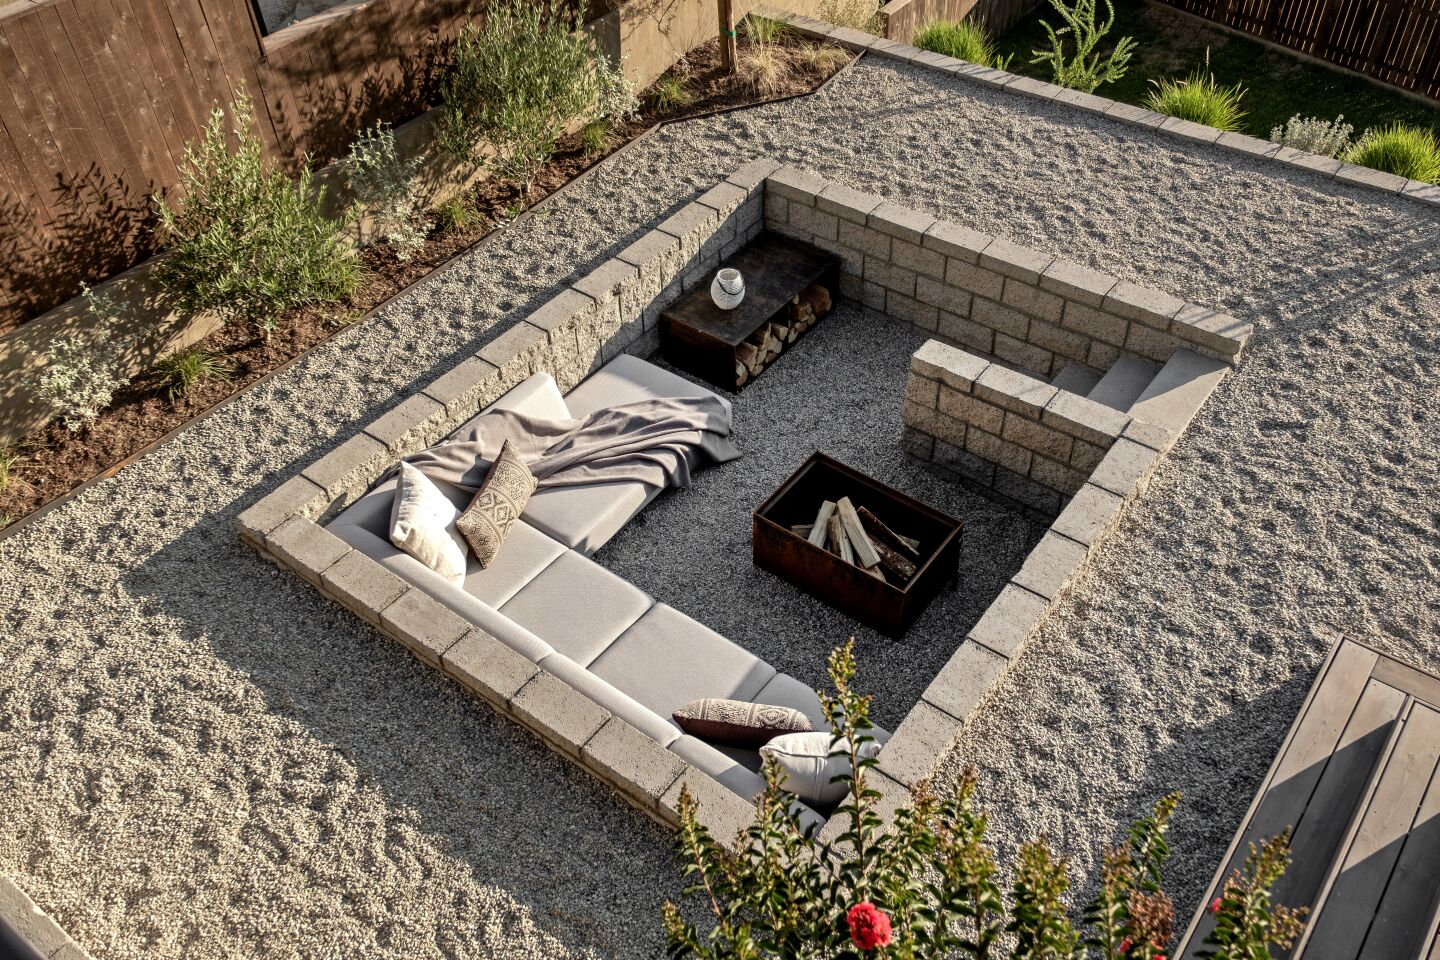 The backyard unfolds layers with tiers of various planters, decks and a sunken conversation/fire pit.